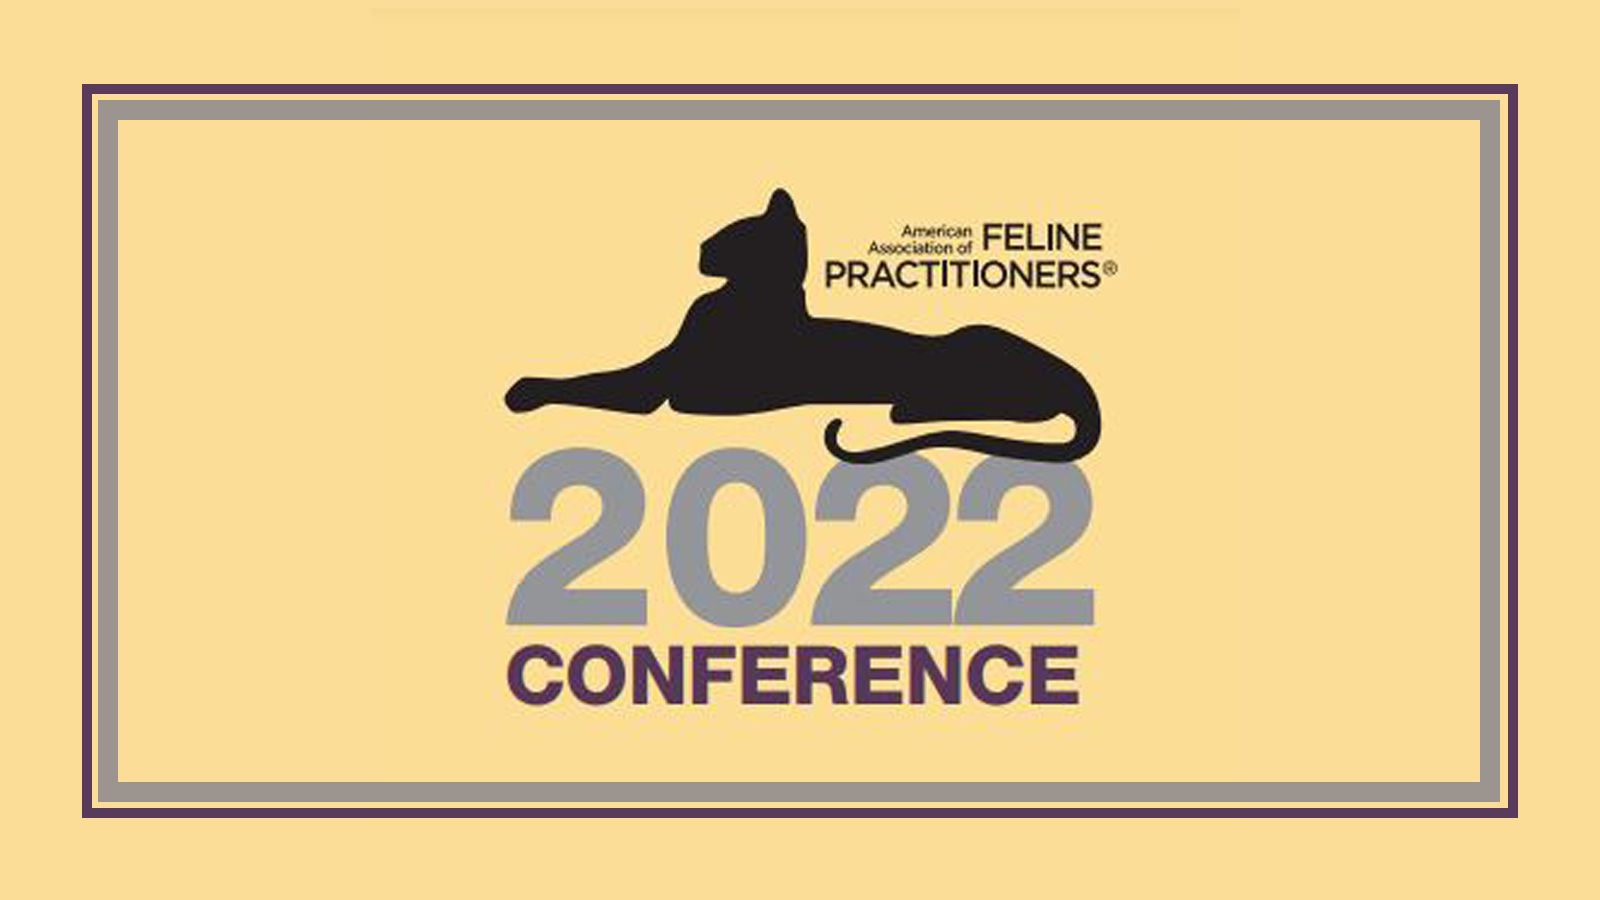 American Association of Feline Practitioners' Conference logo